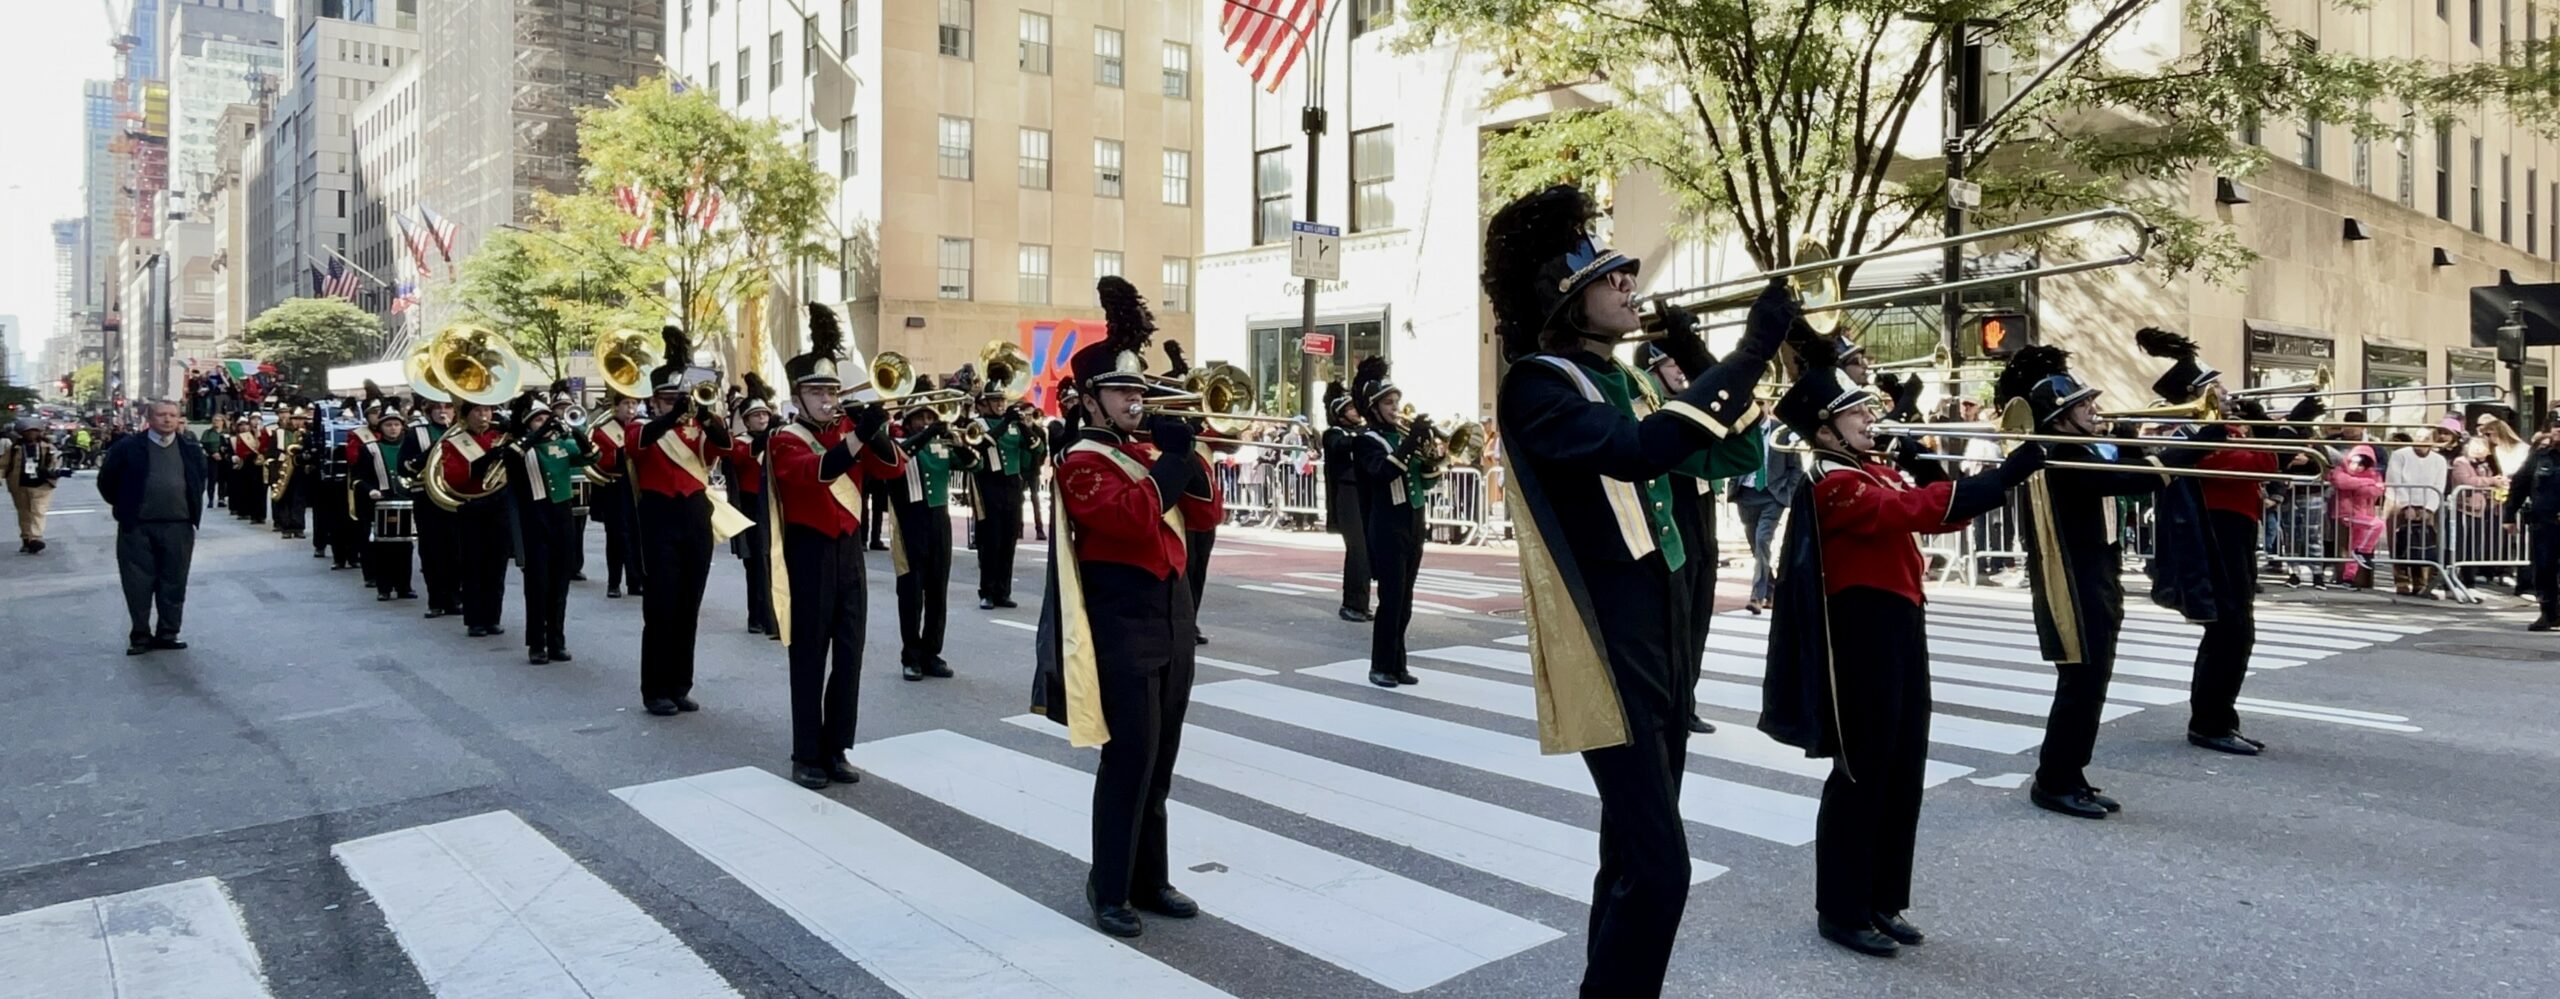 NHV Bands in Columbus Day Parade in NYC